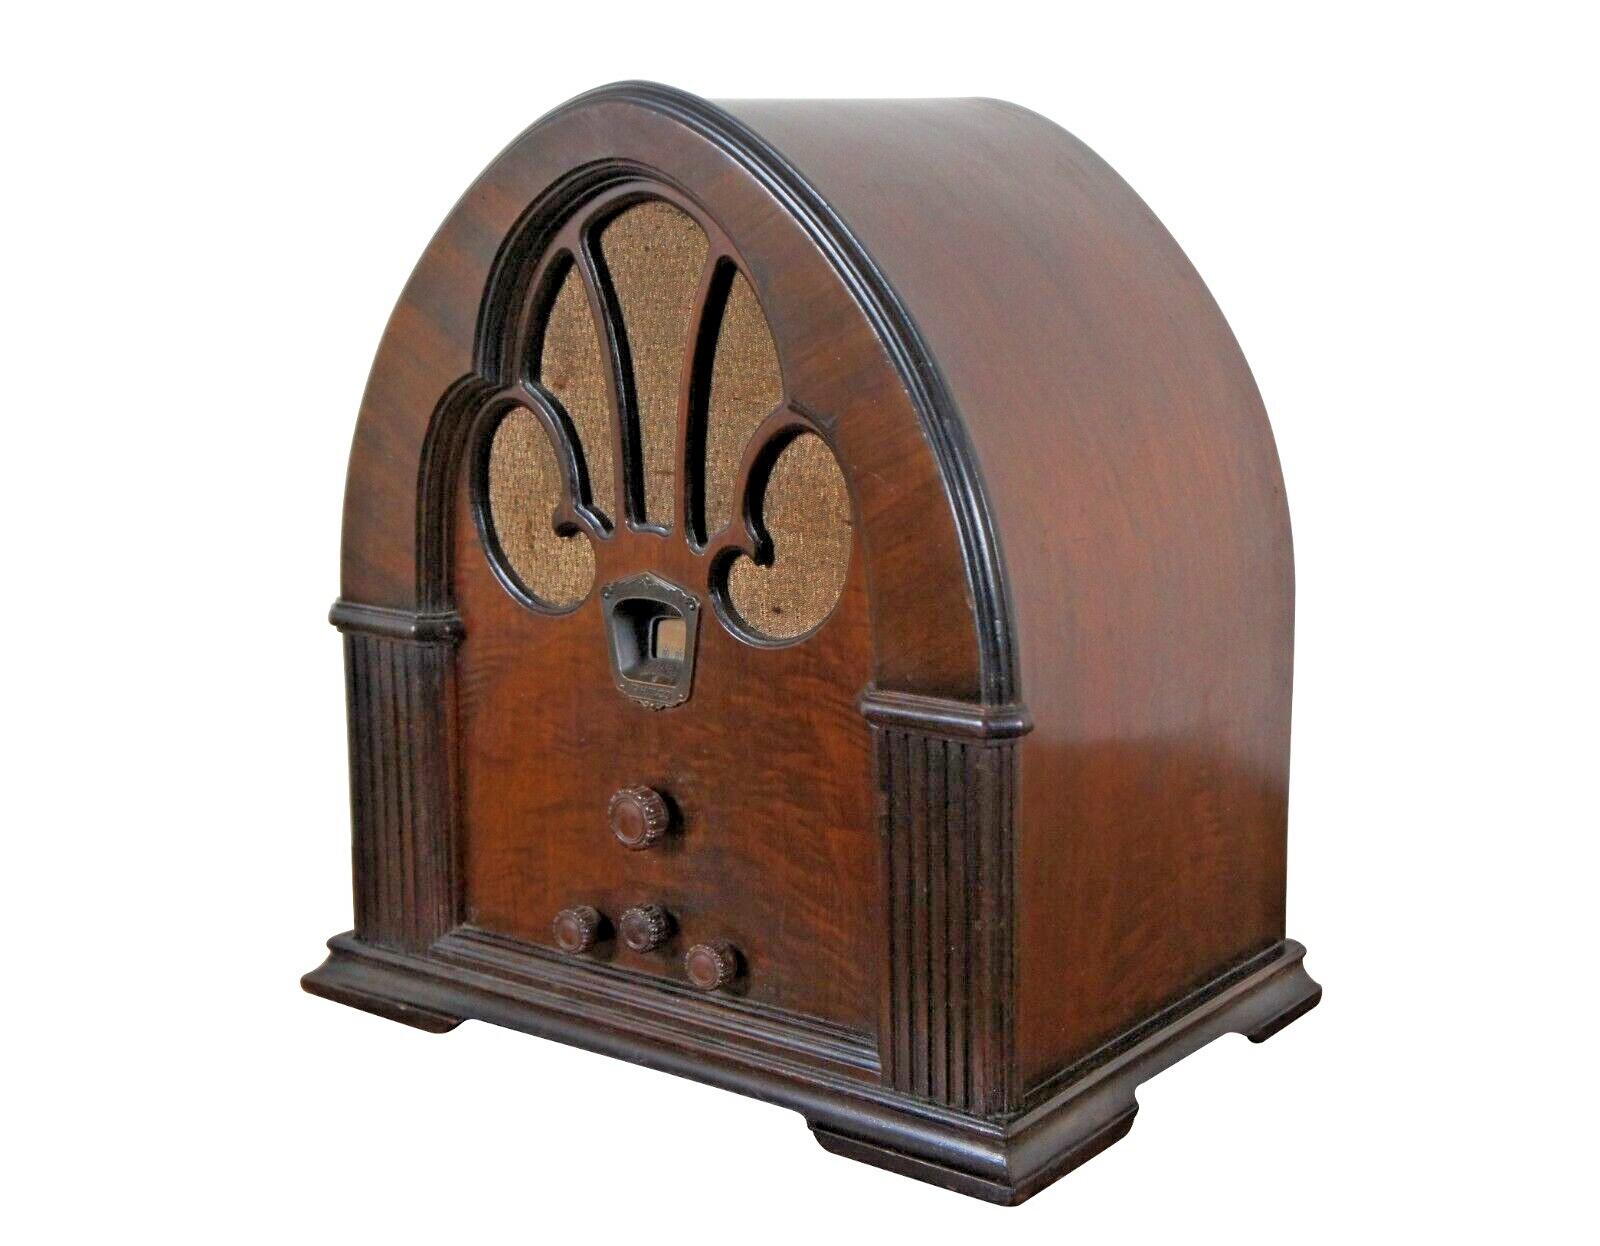 Antique Philco Model 90 Baby Grand Super Heterodyne radio featuring a cathedral style walnut cabinet / case, molded rosette style Bakelite knobs, and golden beige grill cloth.

Referred to as 